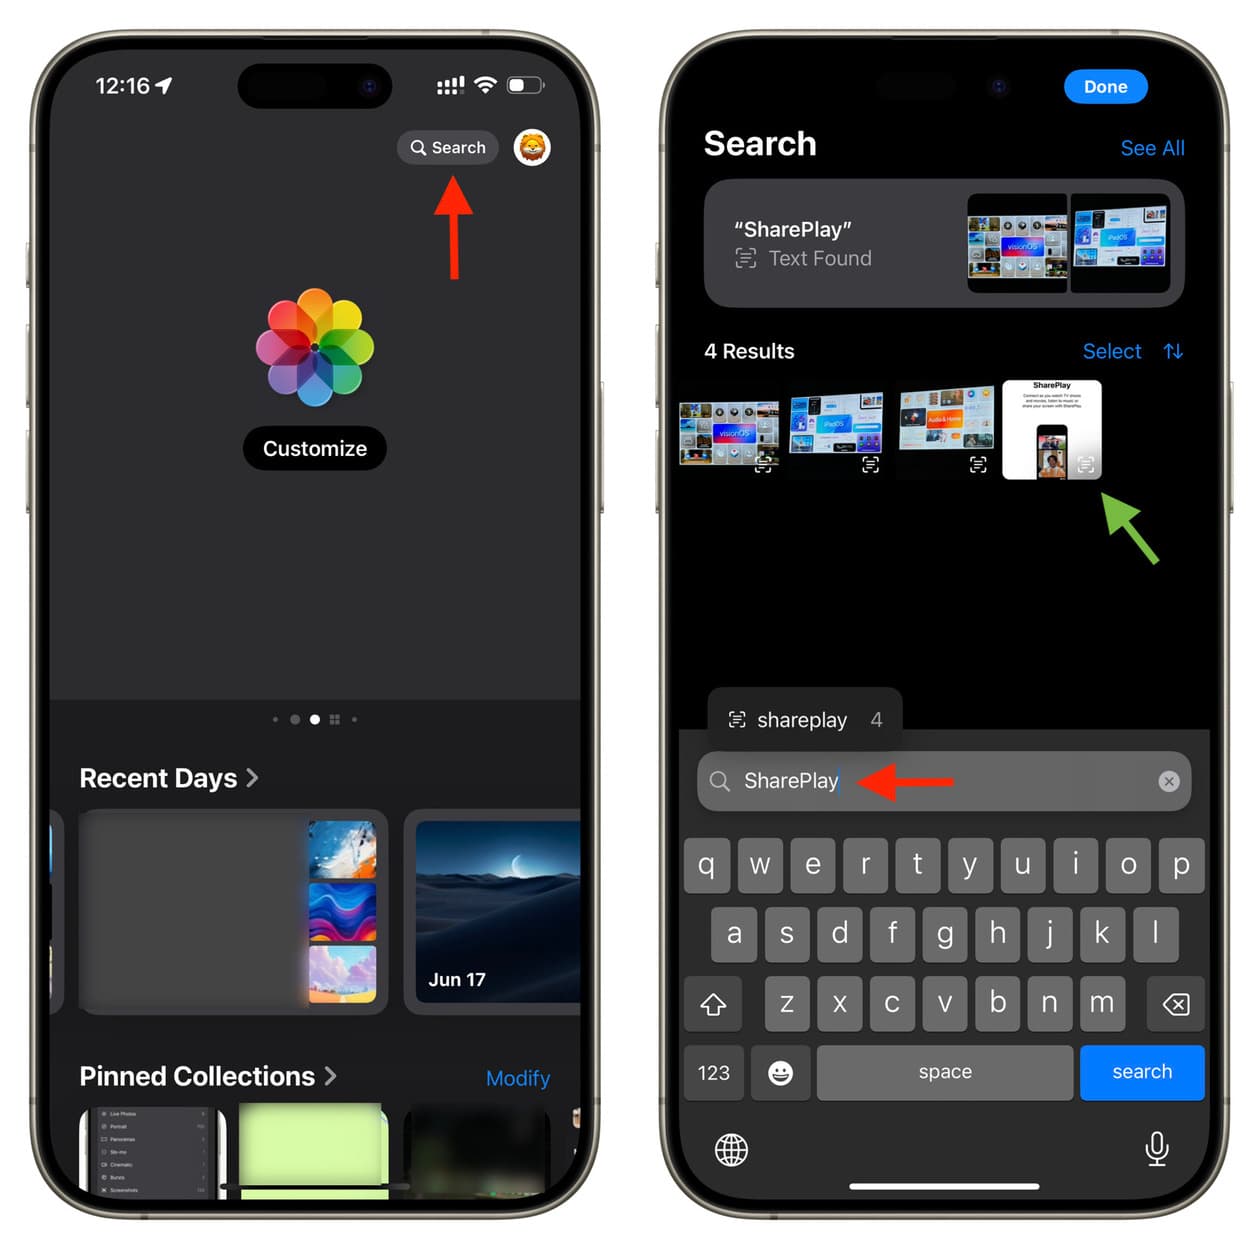 Search for screenshots by text in iPhone Photos app